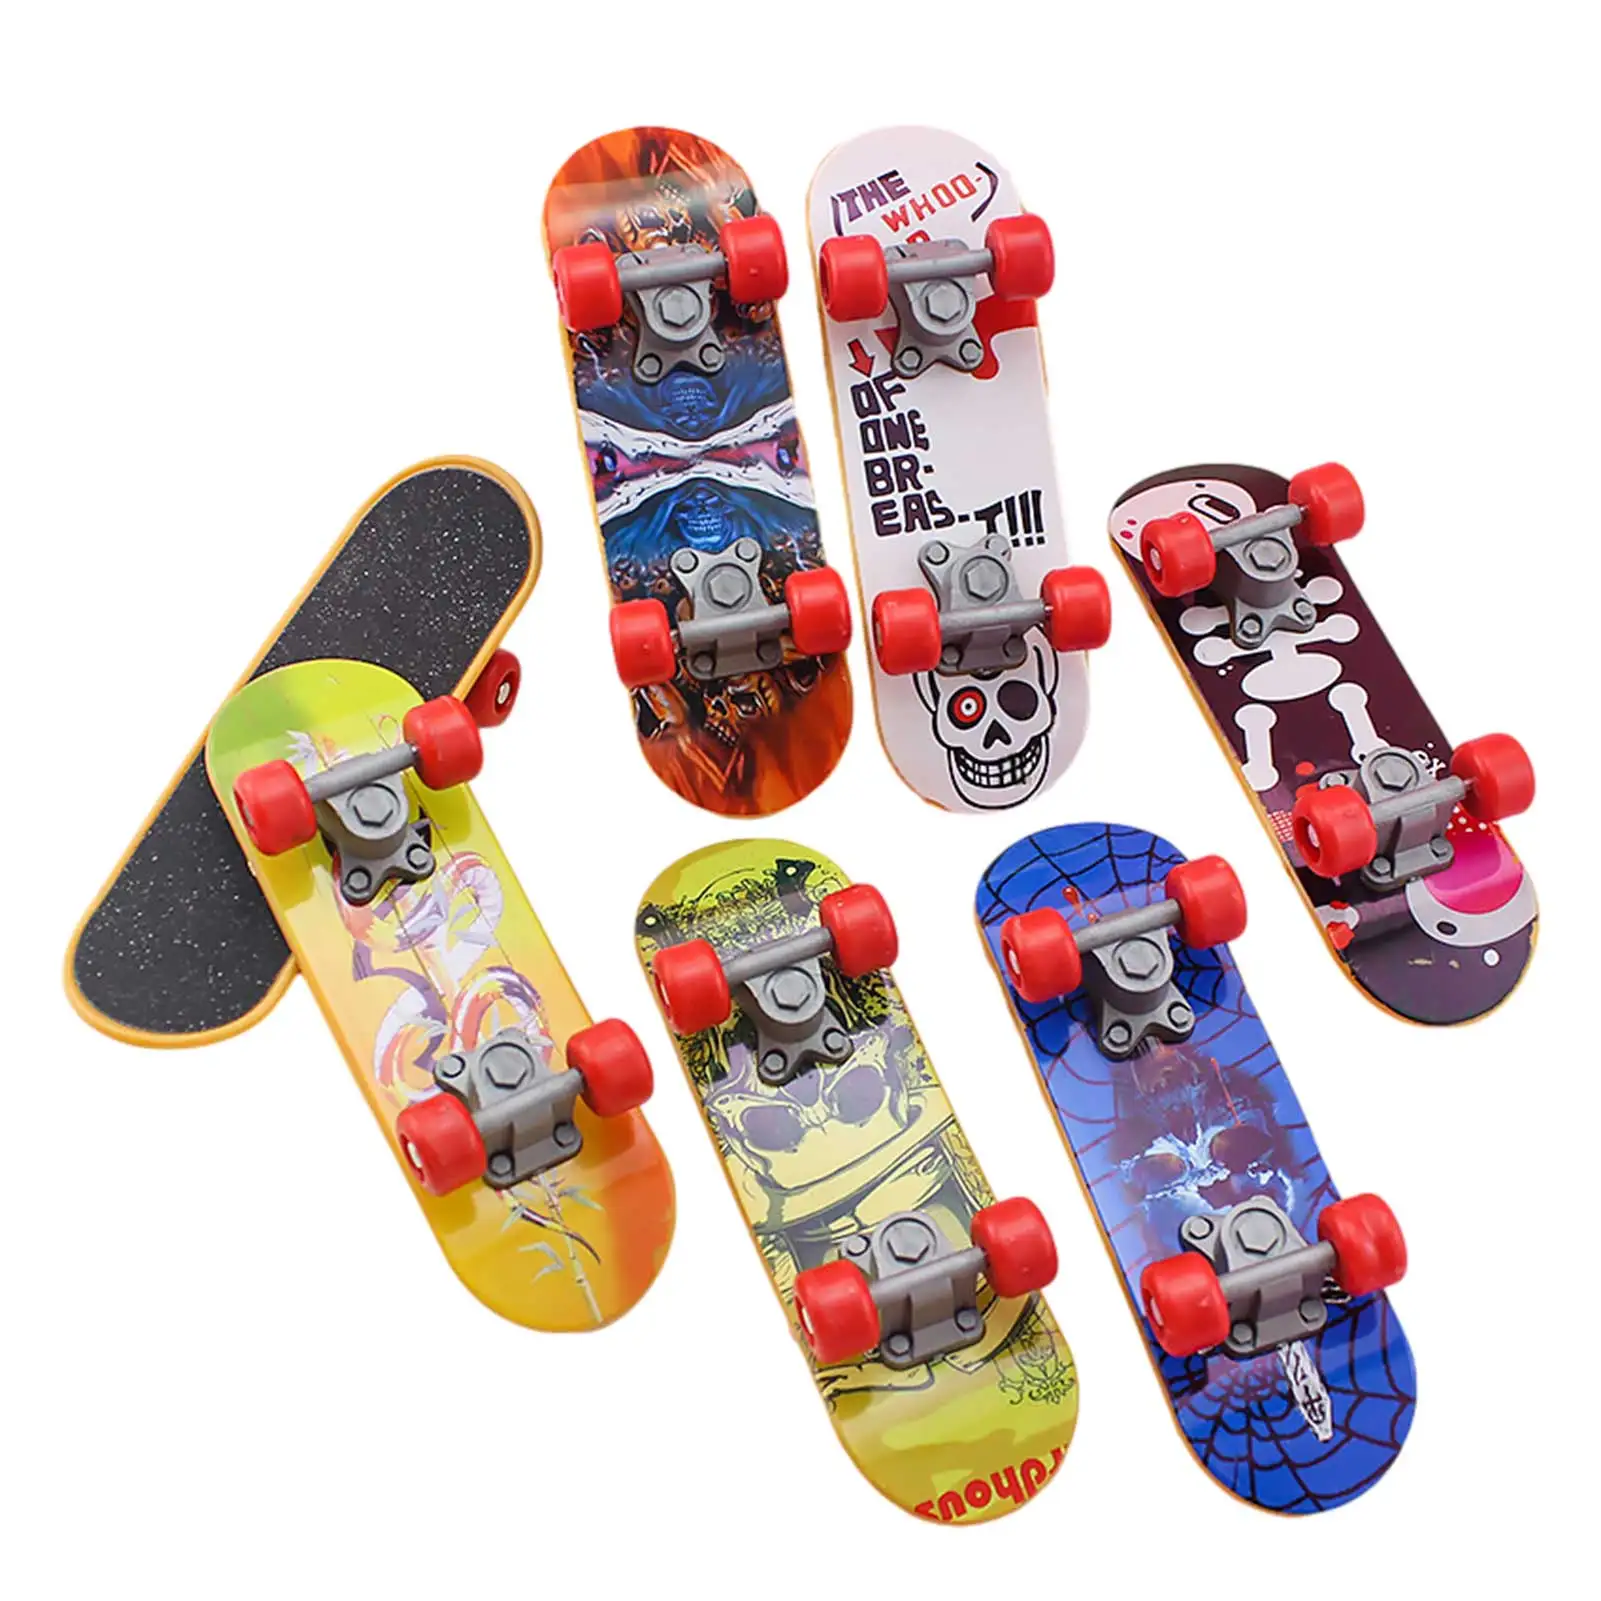 B QNFY Mini Finger Skateboard Deck Truck Board with Ramp Accessories Sets Fingerboard Toy Ultimate Parks Training Props Kids Birthday Gift 